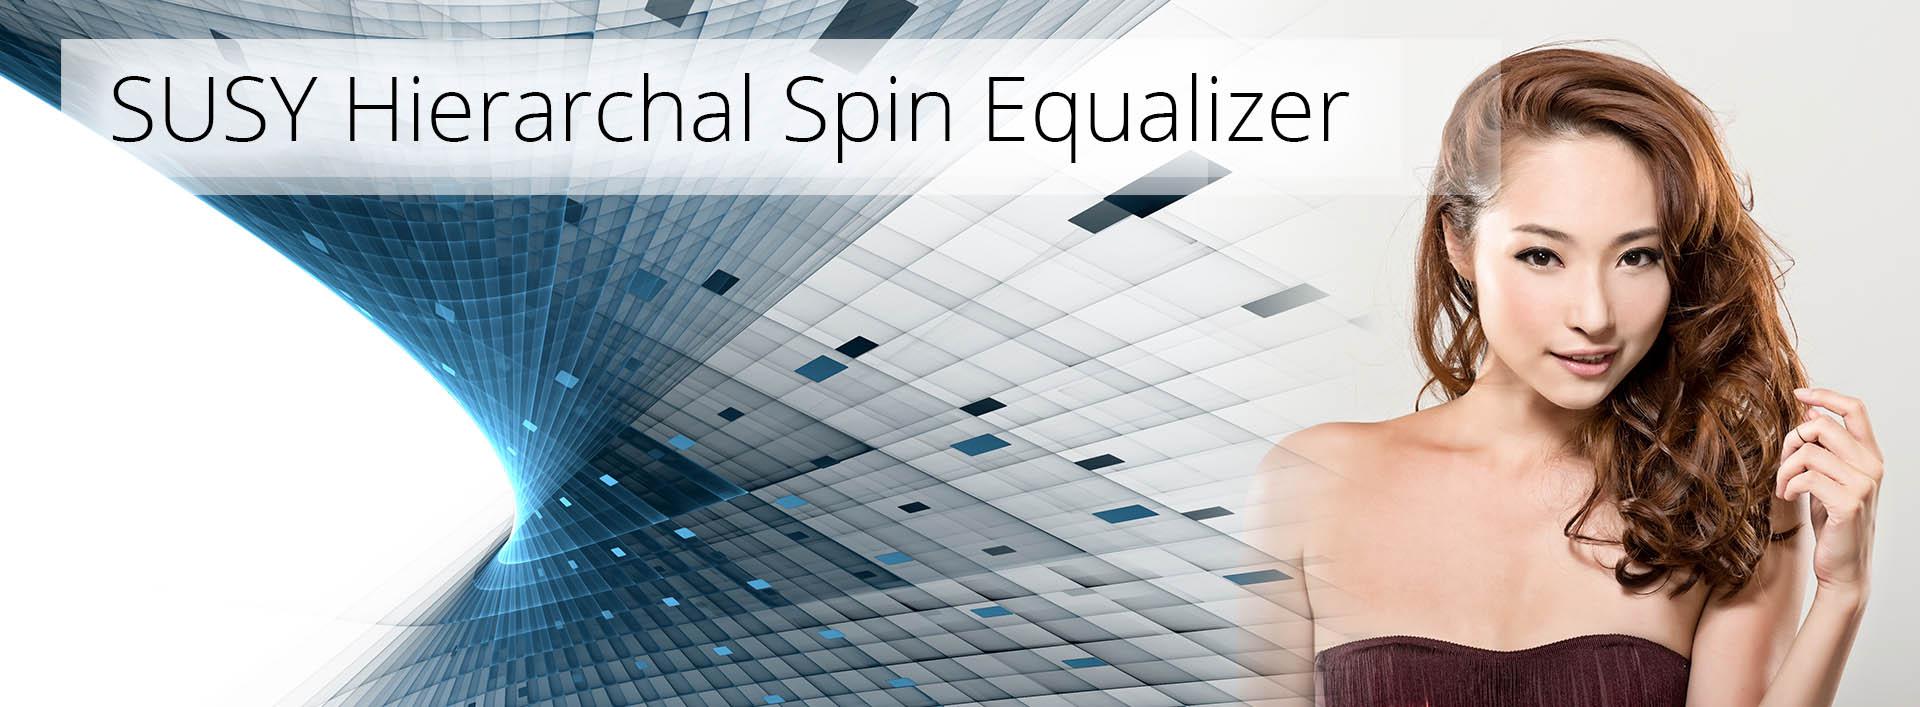 The SUSY Hierarchal Spin Equalizer